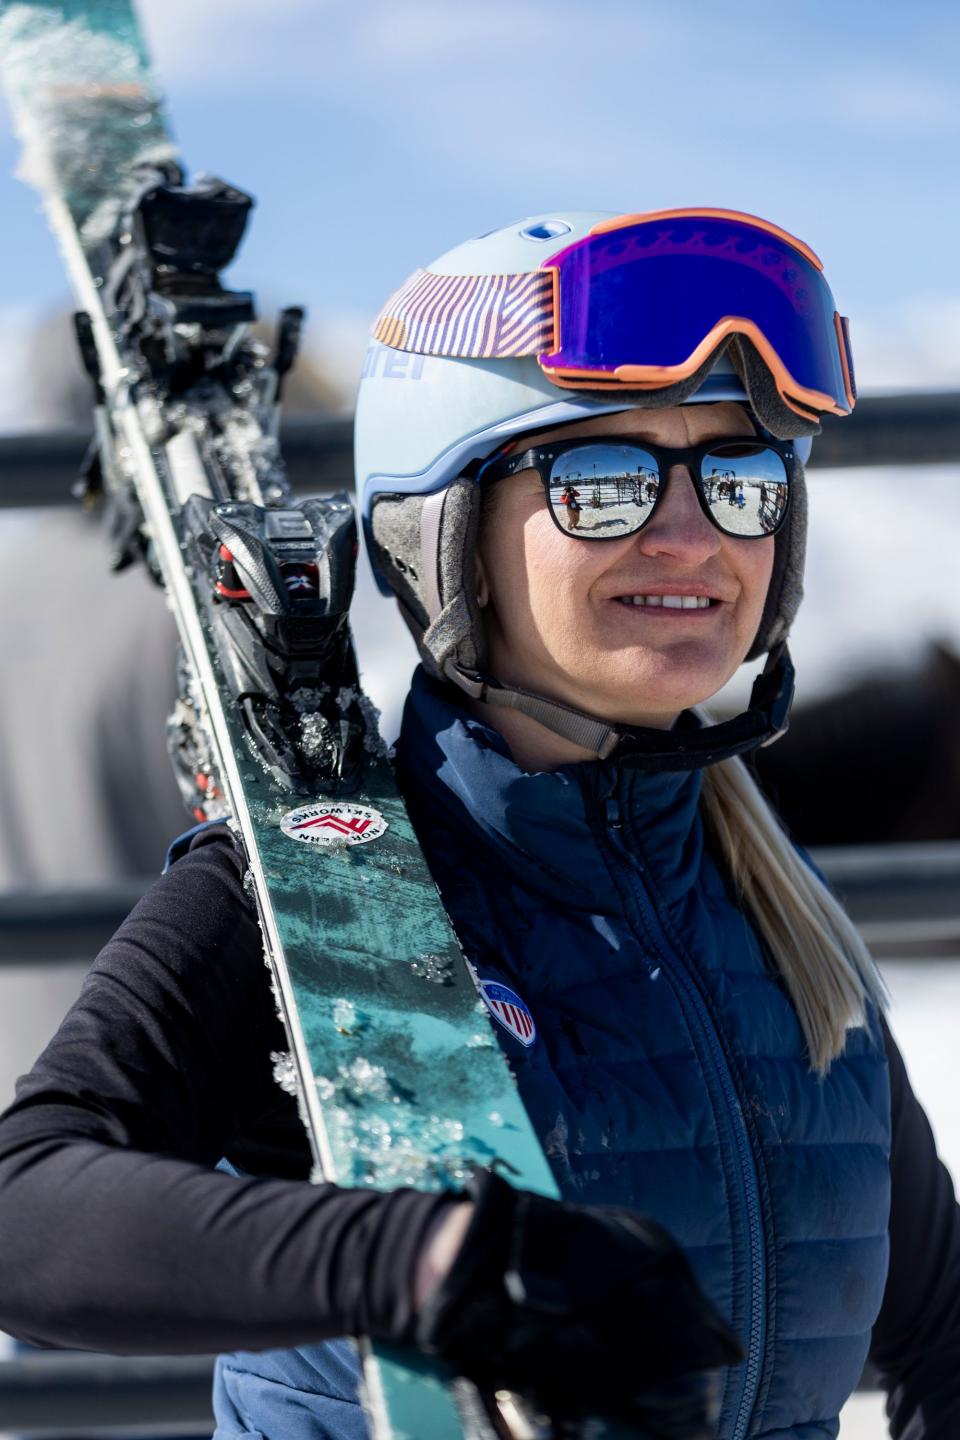 Maeghan Lenigan poses for a portrait during the 2024 Utah Skijoring competition at the Wasatch County Event Complex in Heber City on Saturday, Feb. 17, 2024. Lenigan is a ski instructor in Park City; it was her first time competing. “Right here, right now, I feel like the richest person in the world,” she says. | Marielle Scott, Deseret News